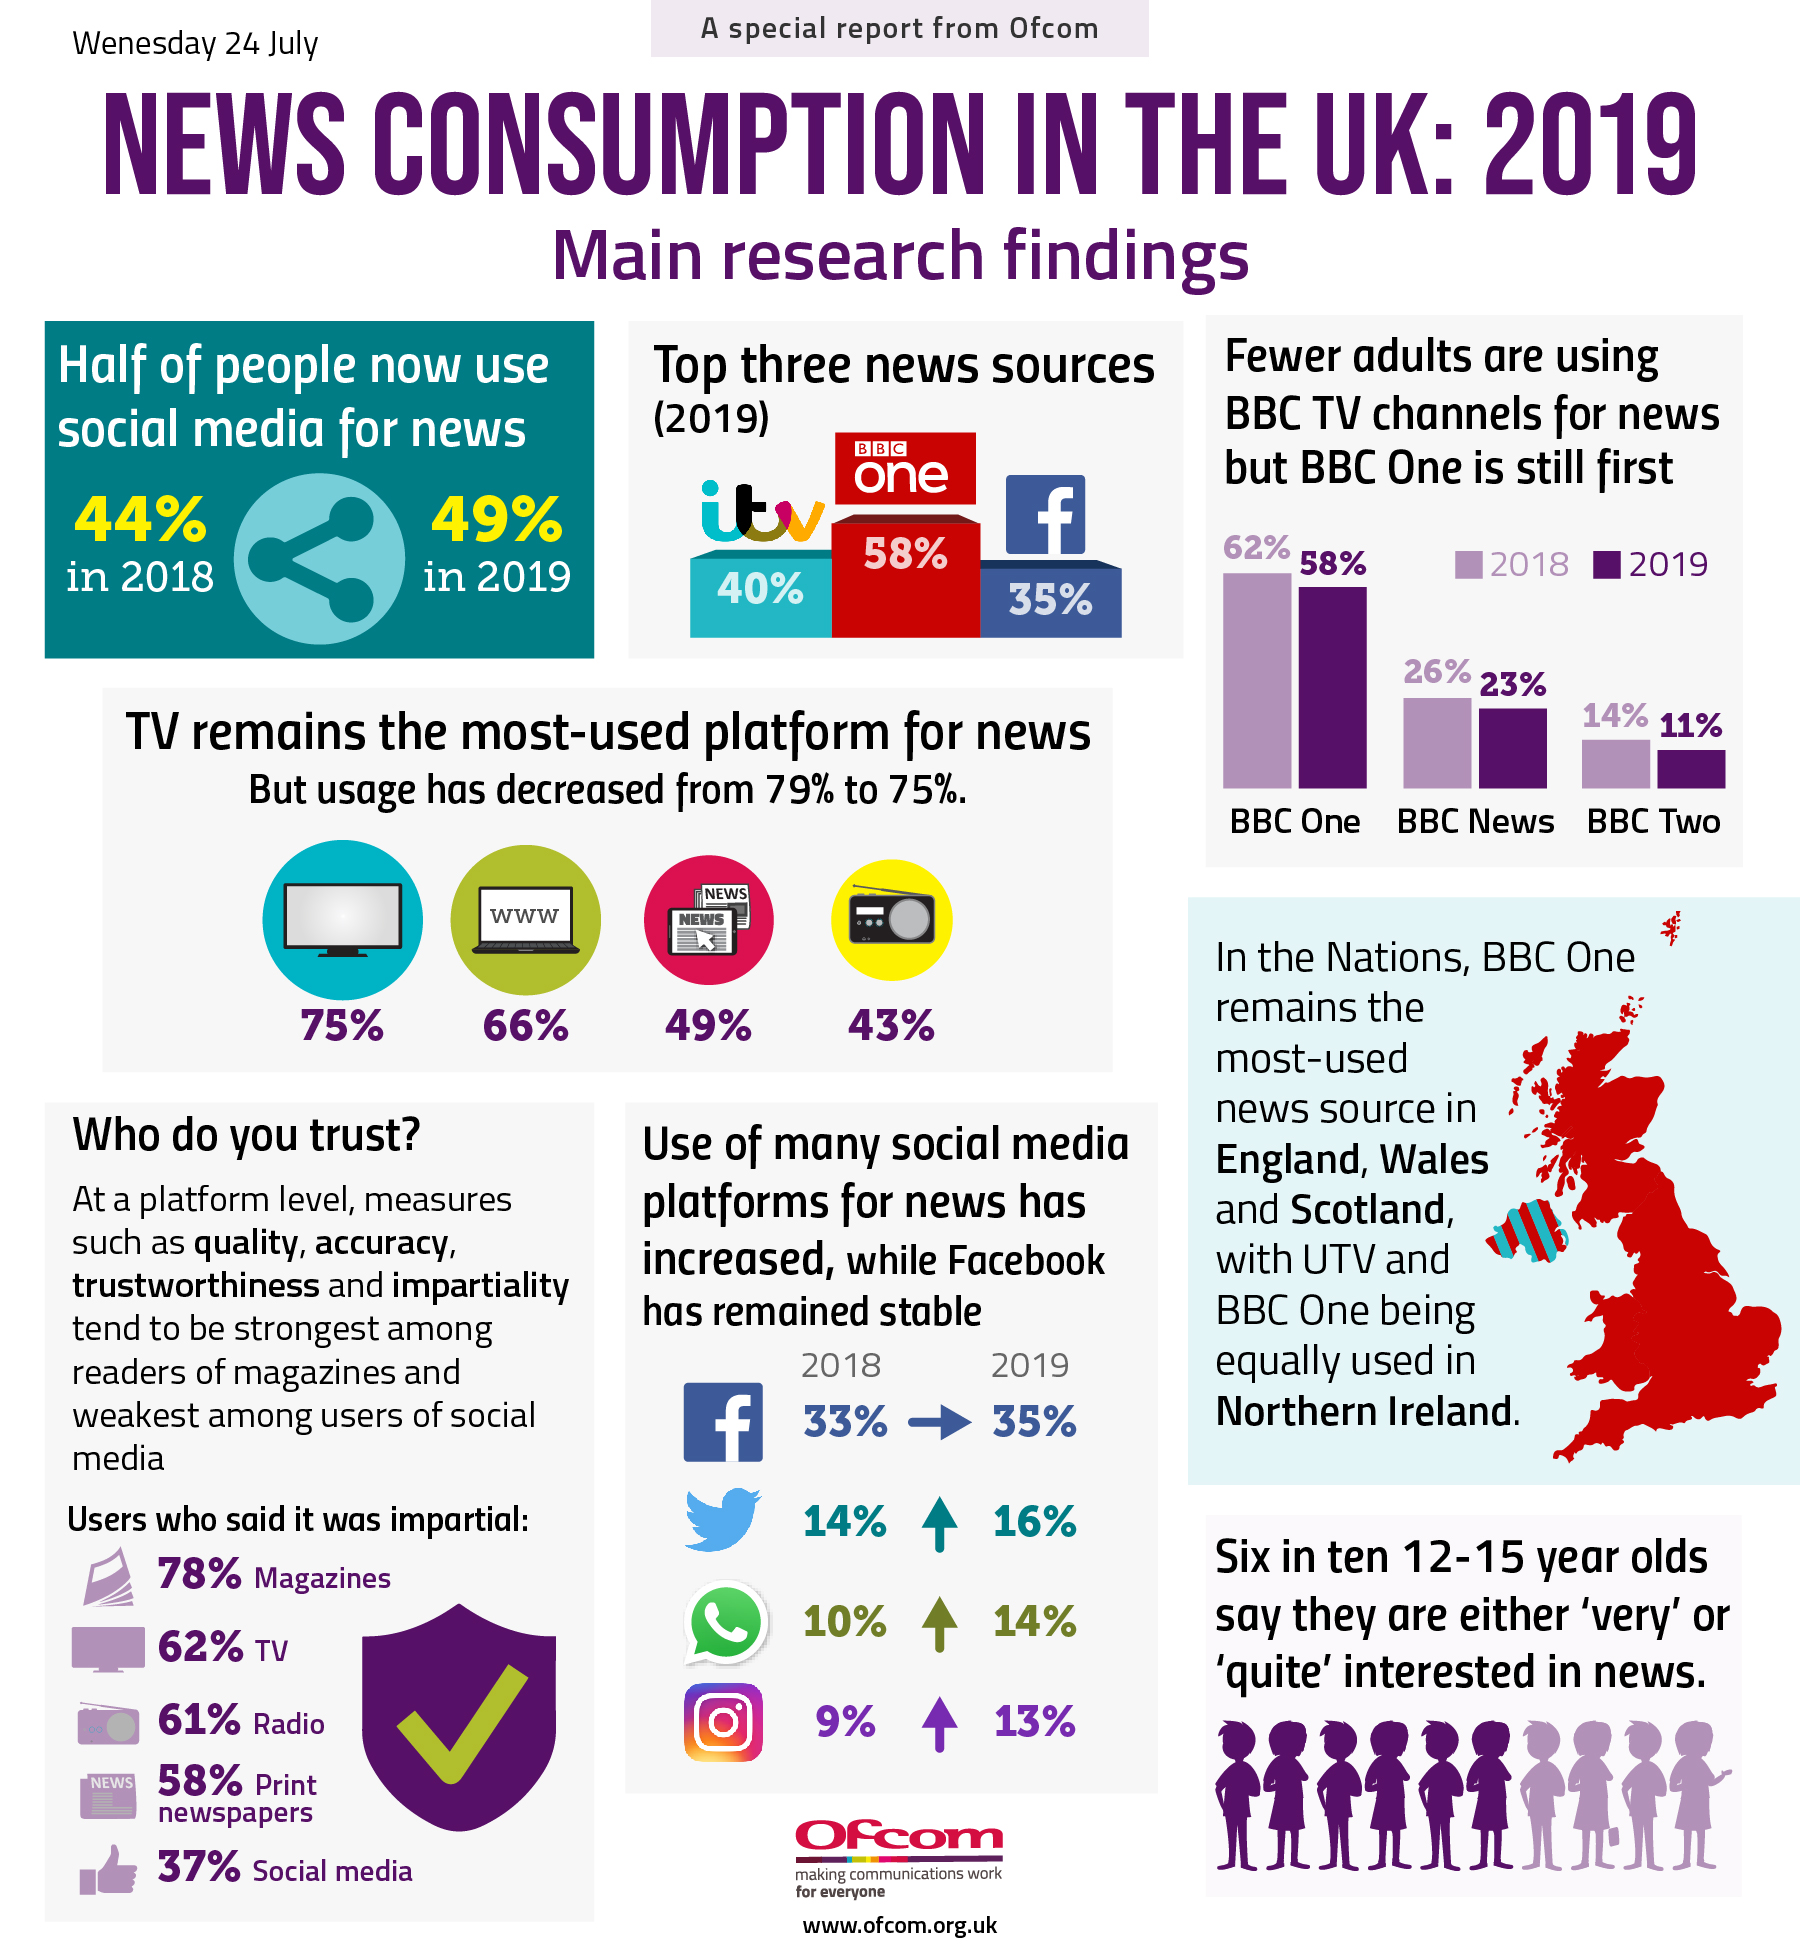 Key research findings: TV is the most-used platform for news, despite an overall decrease in use. More adults are using social media and fewer using BBC TV channels for news. The number of adults who use social media for news has increased from 44% in 2018 to 29% in 2019.